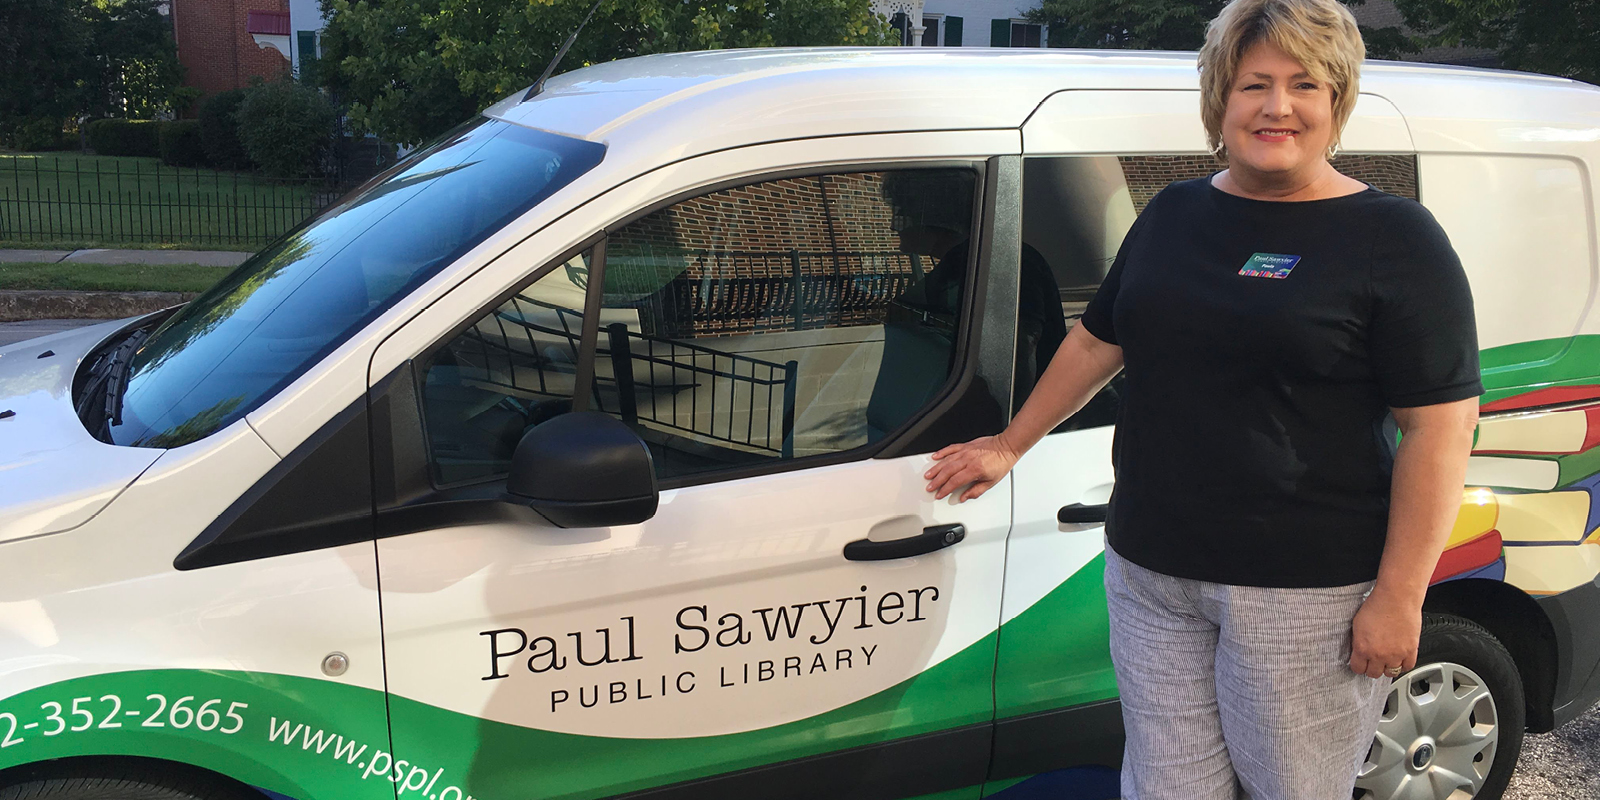 Librarian smiling and standing in from of the Paul Sawyier Public Library Van